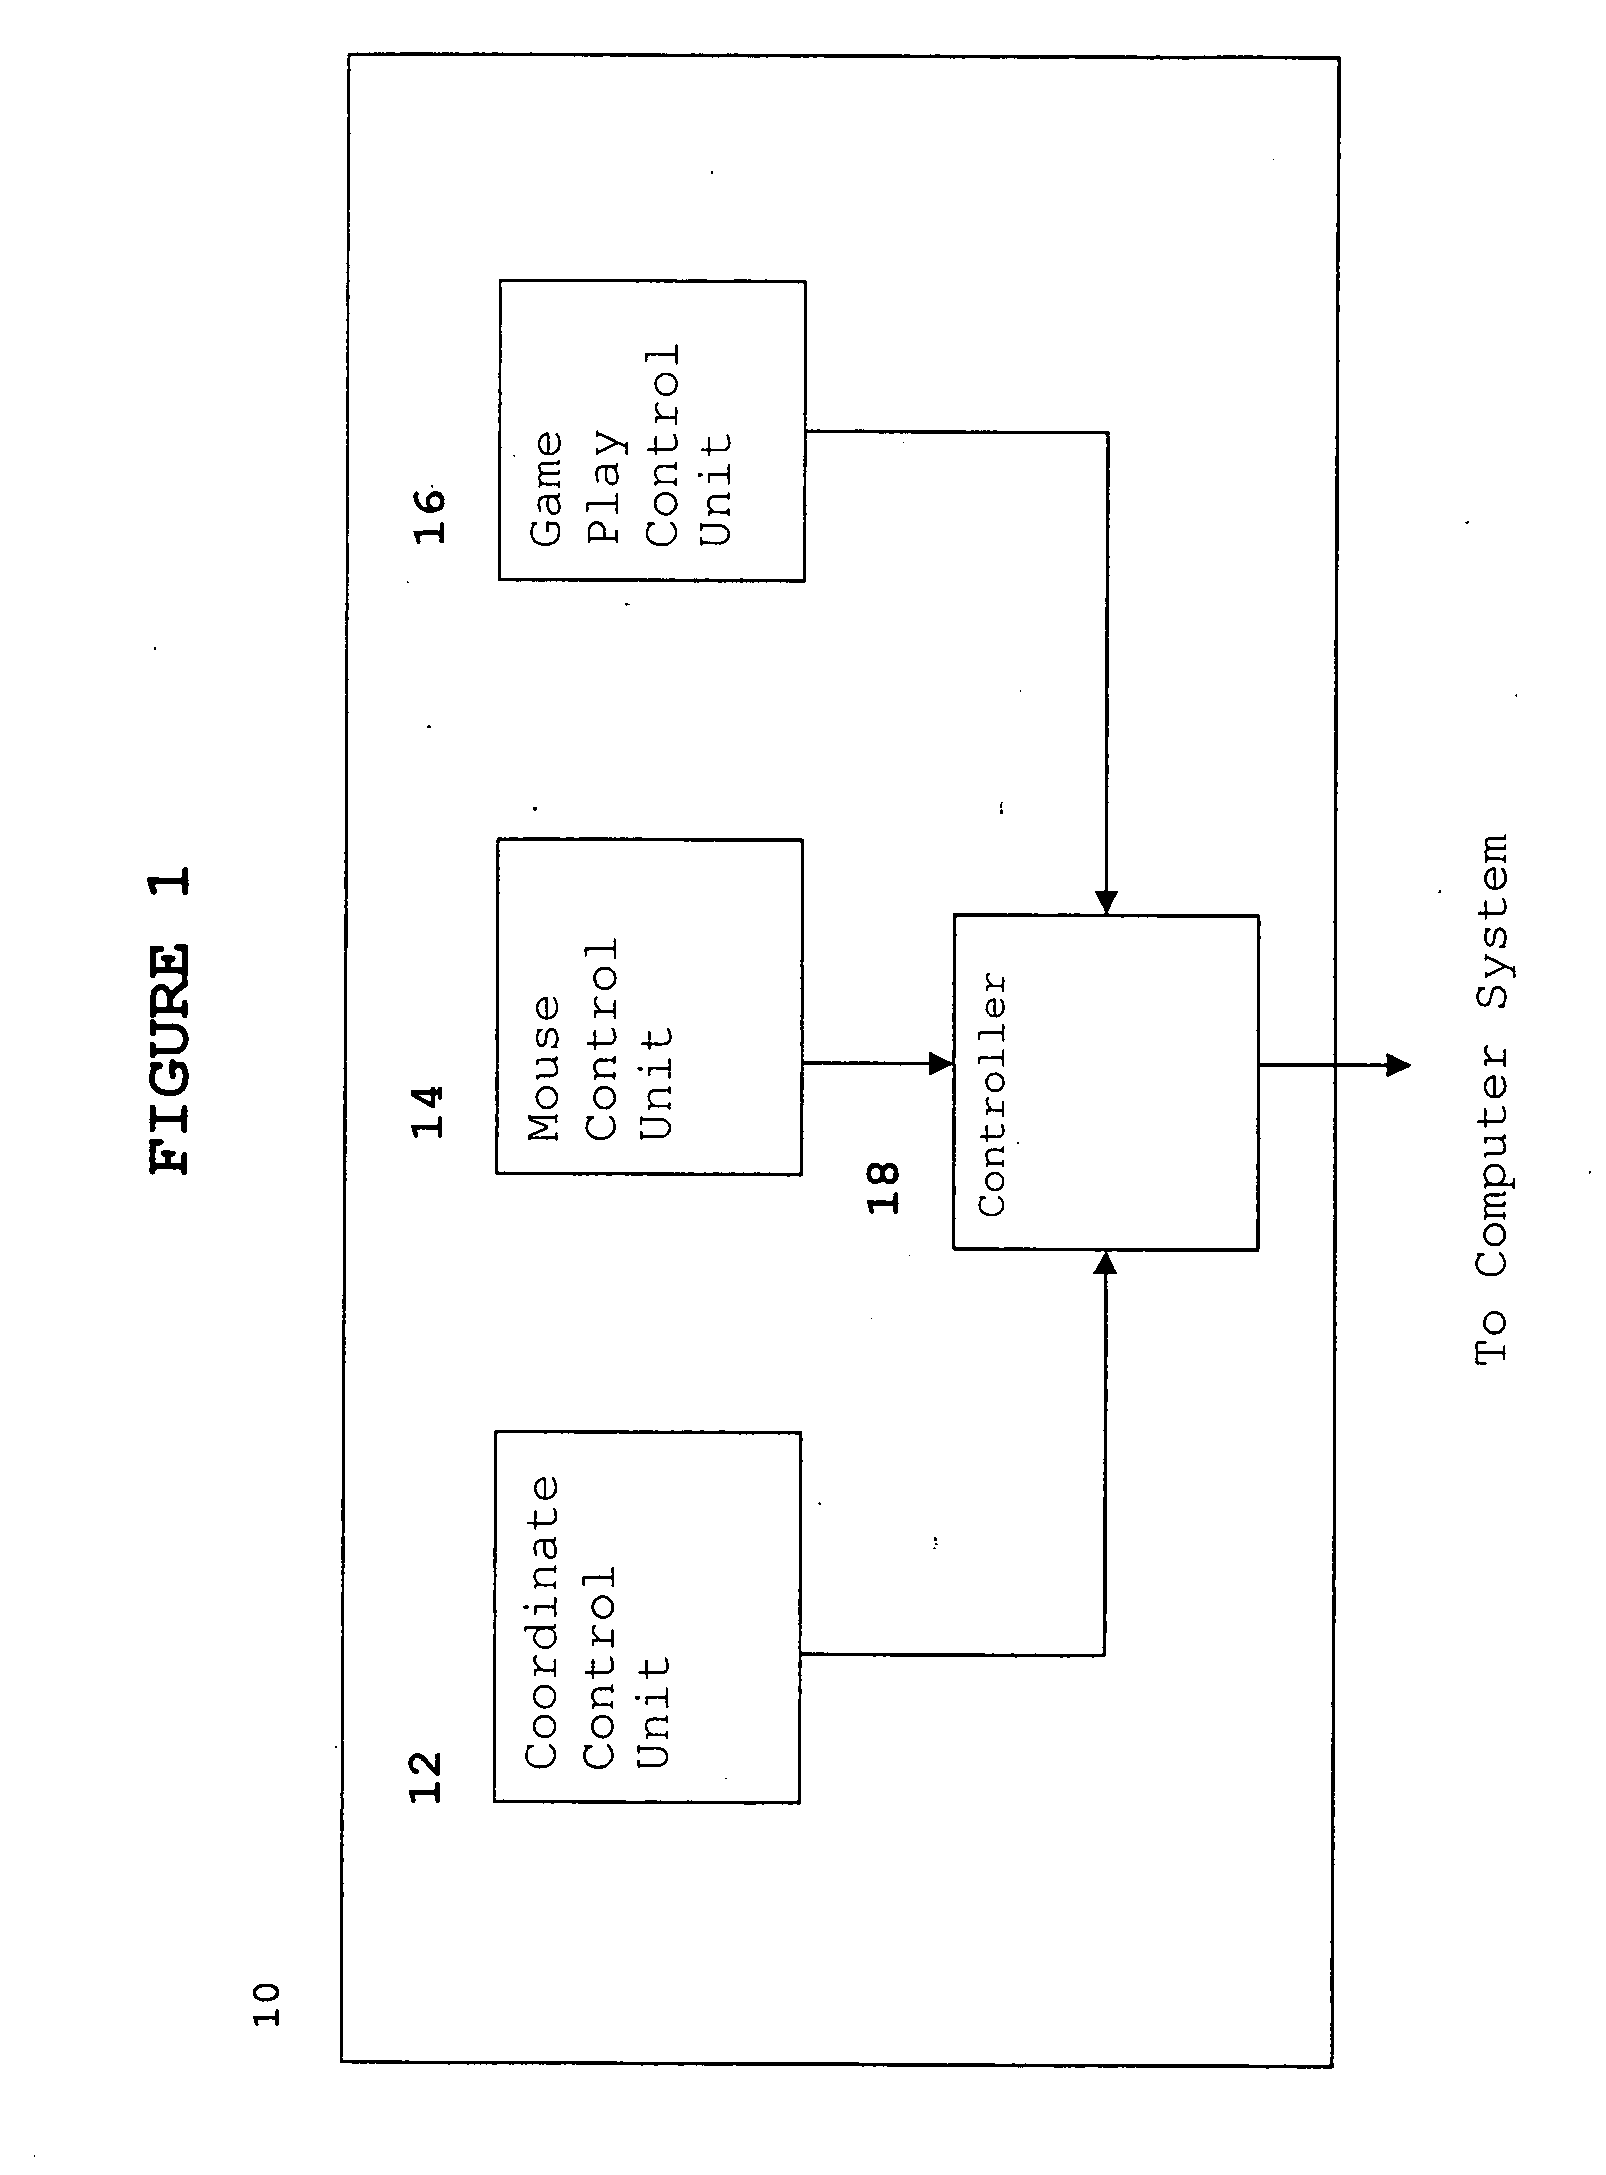 Control apparatus for use with a computer or video game system